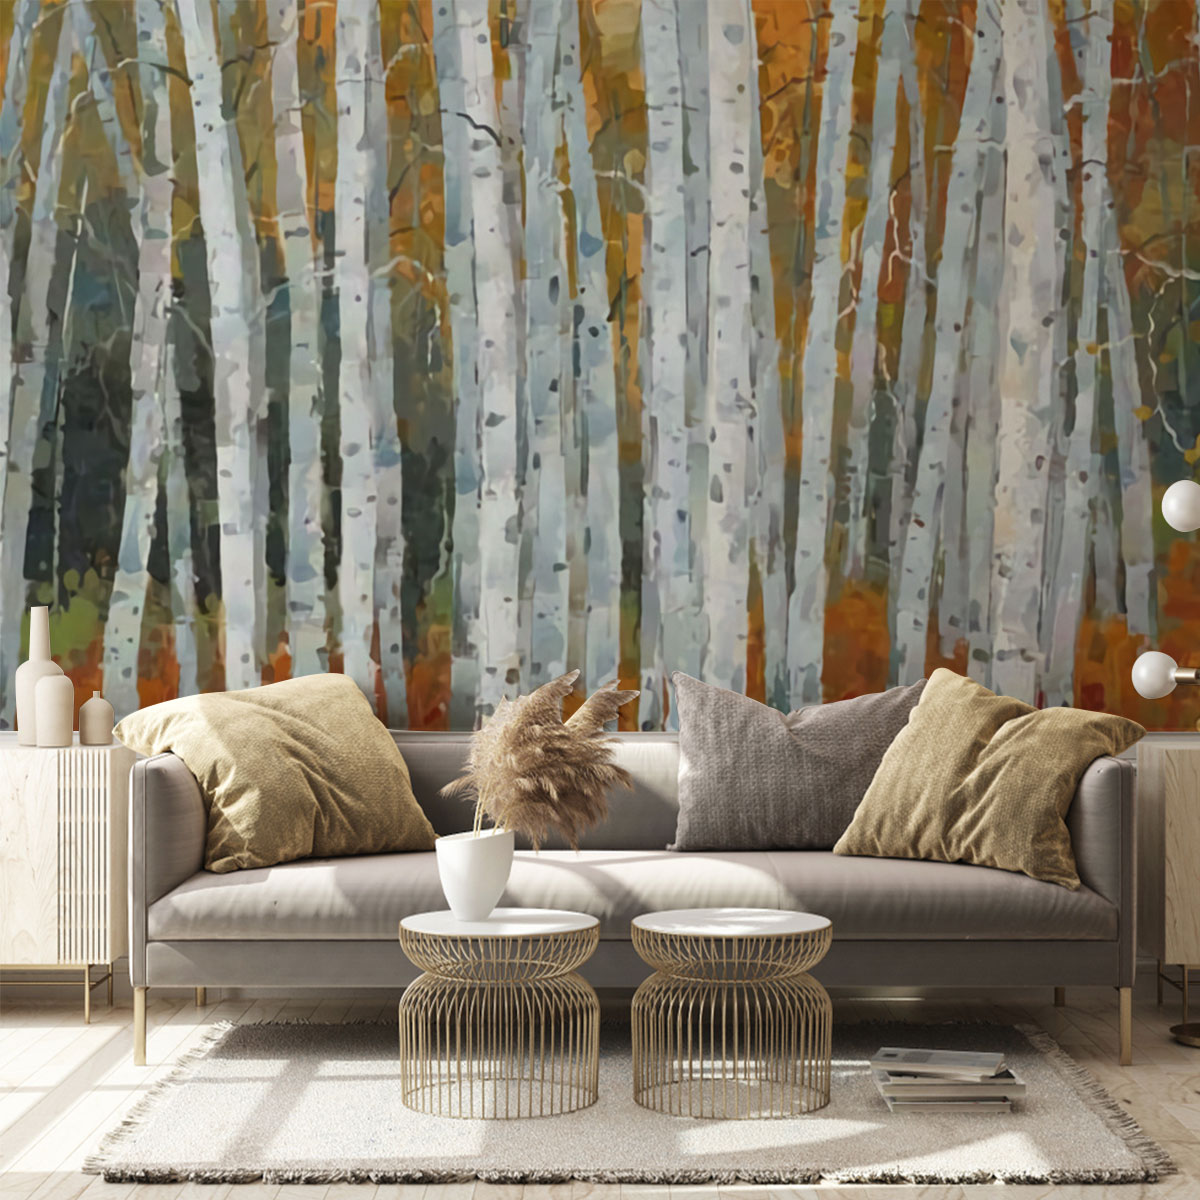 Red Birch Tree Wall Mural